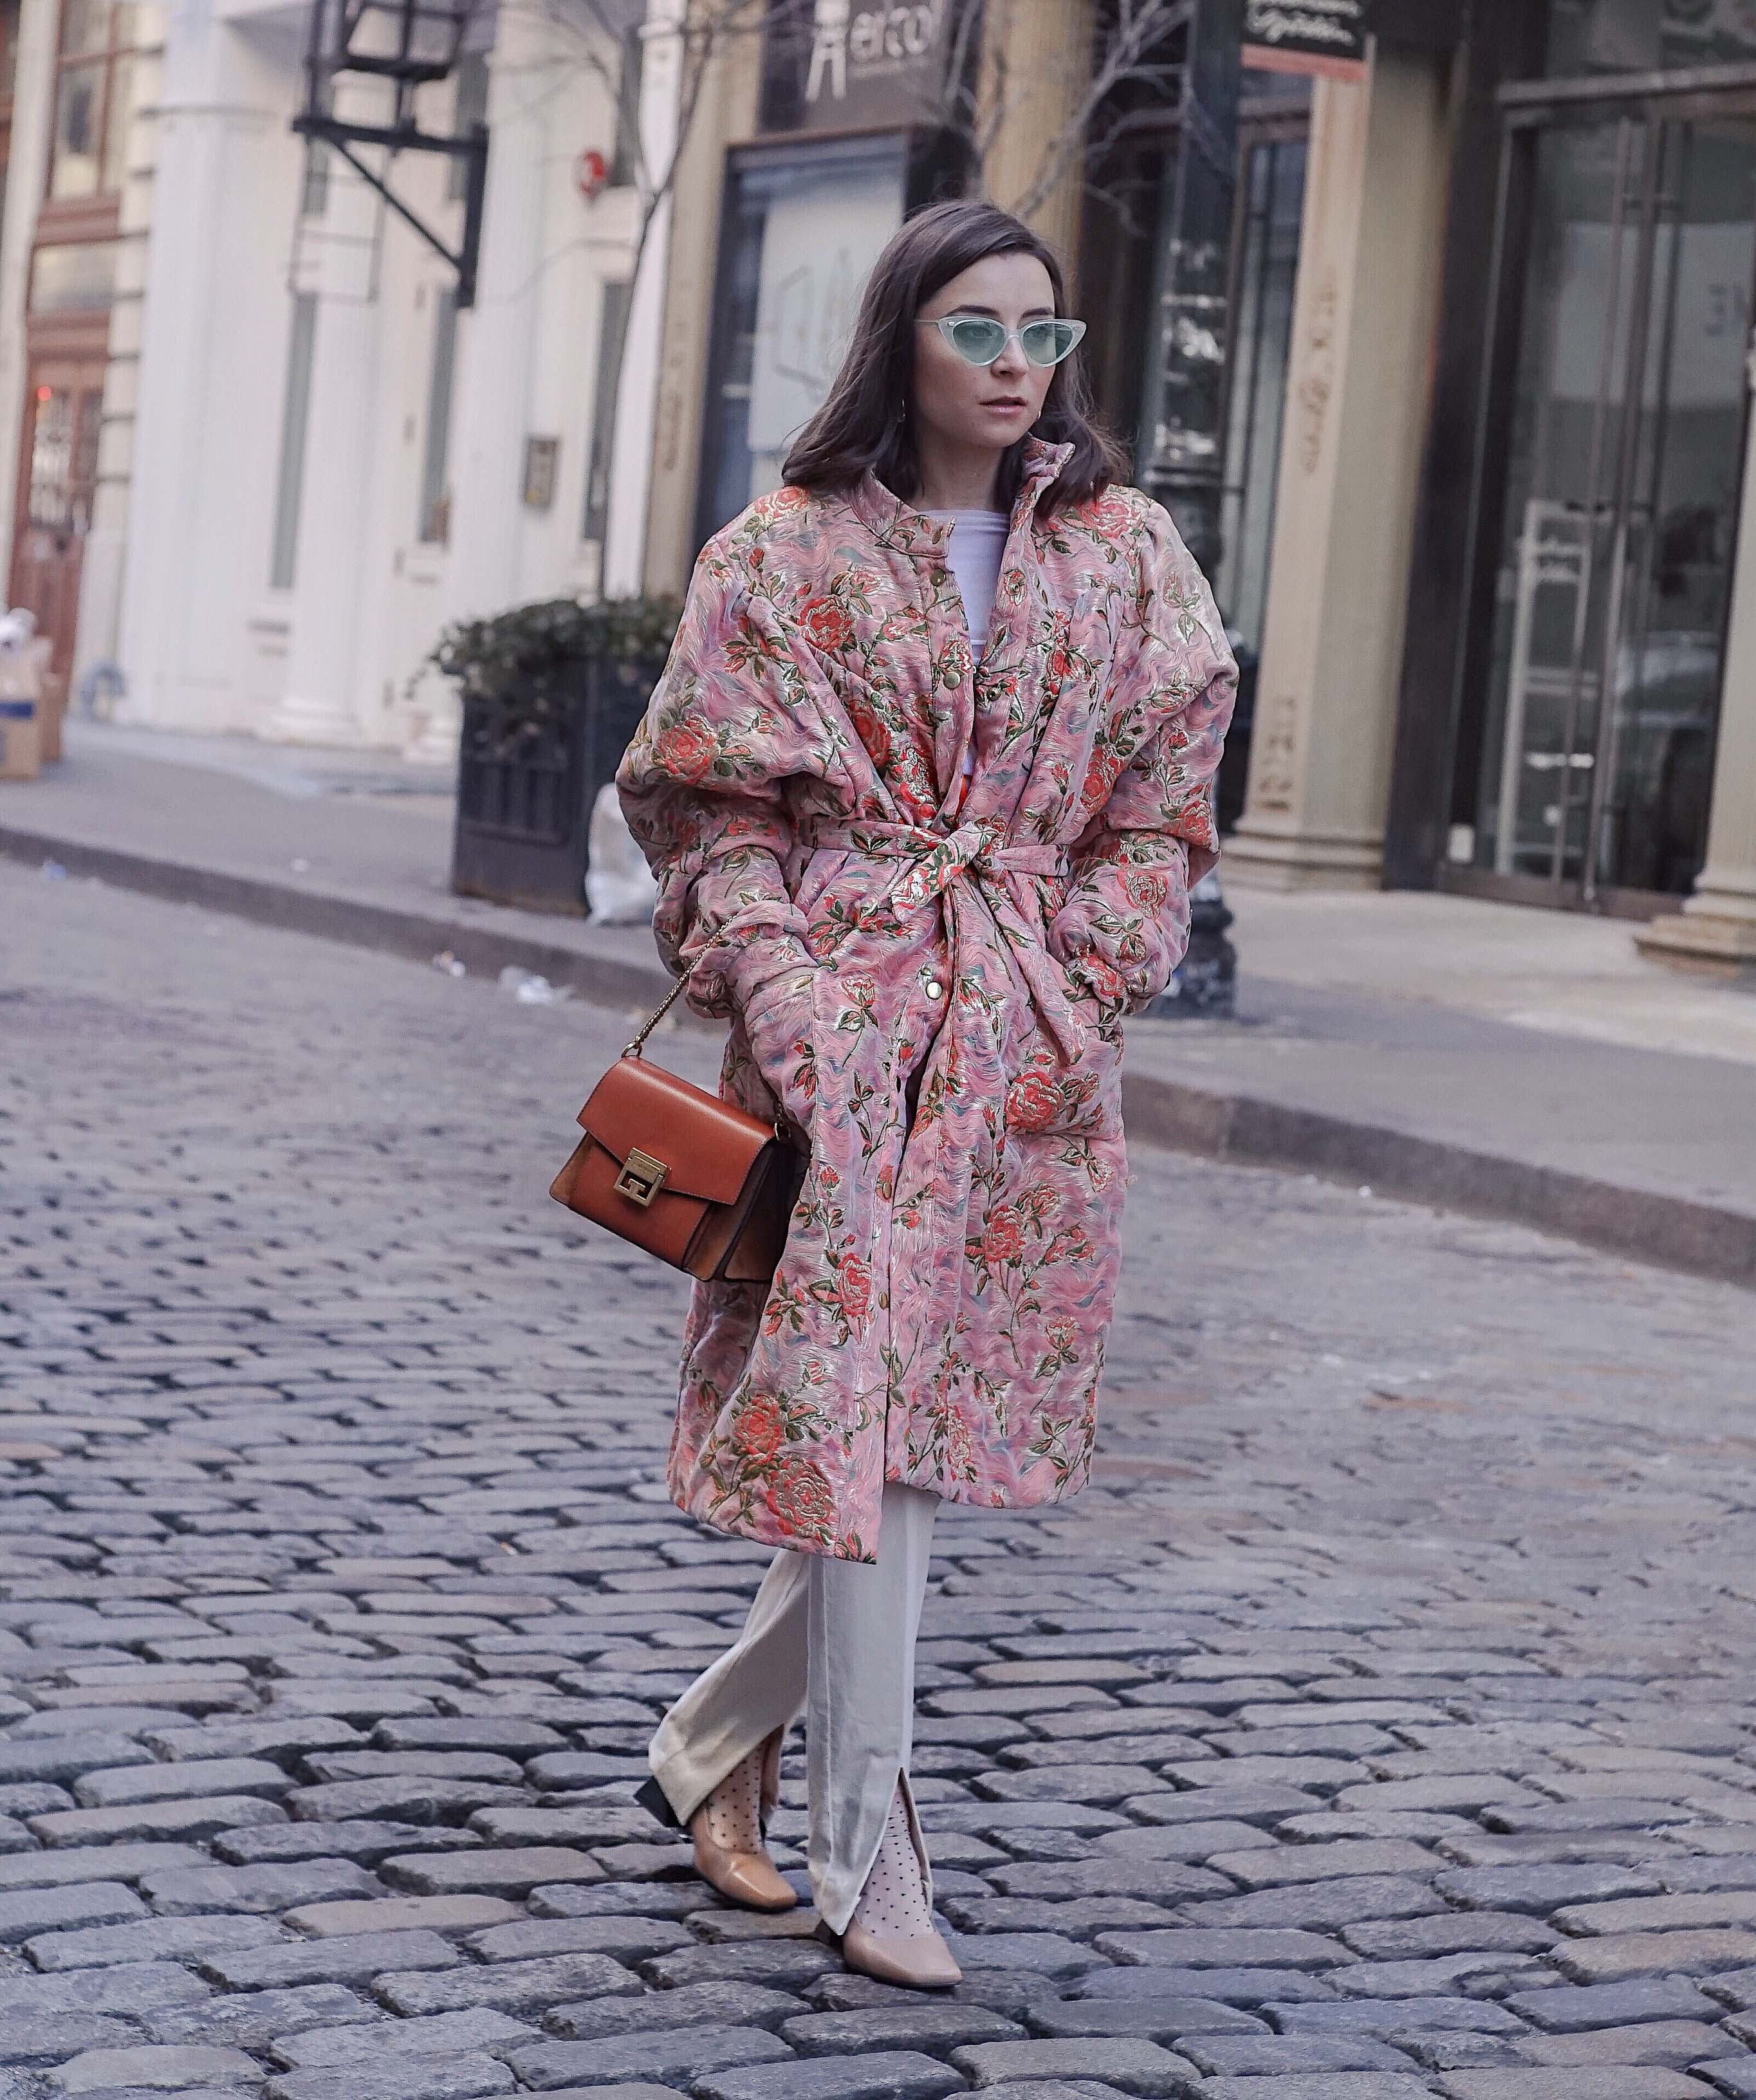 NYFW fall 2019 report julia comil outfit Malene Oddershede Bach hybrid coat made with a unique jacquard fabric with loose threads / givenchy bag / Yuul Yie pumps / Sunglasses Cutler & Gross